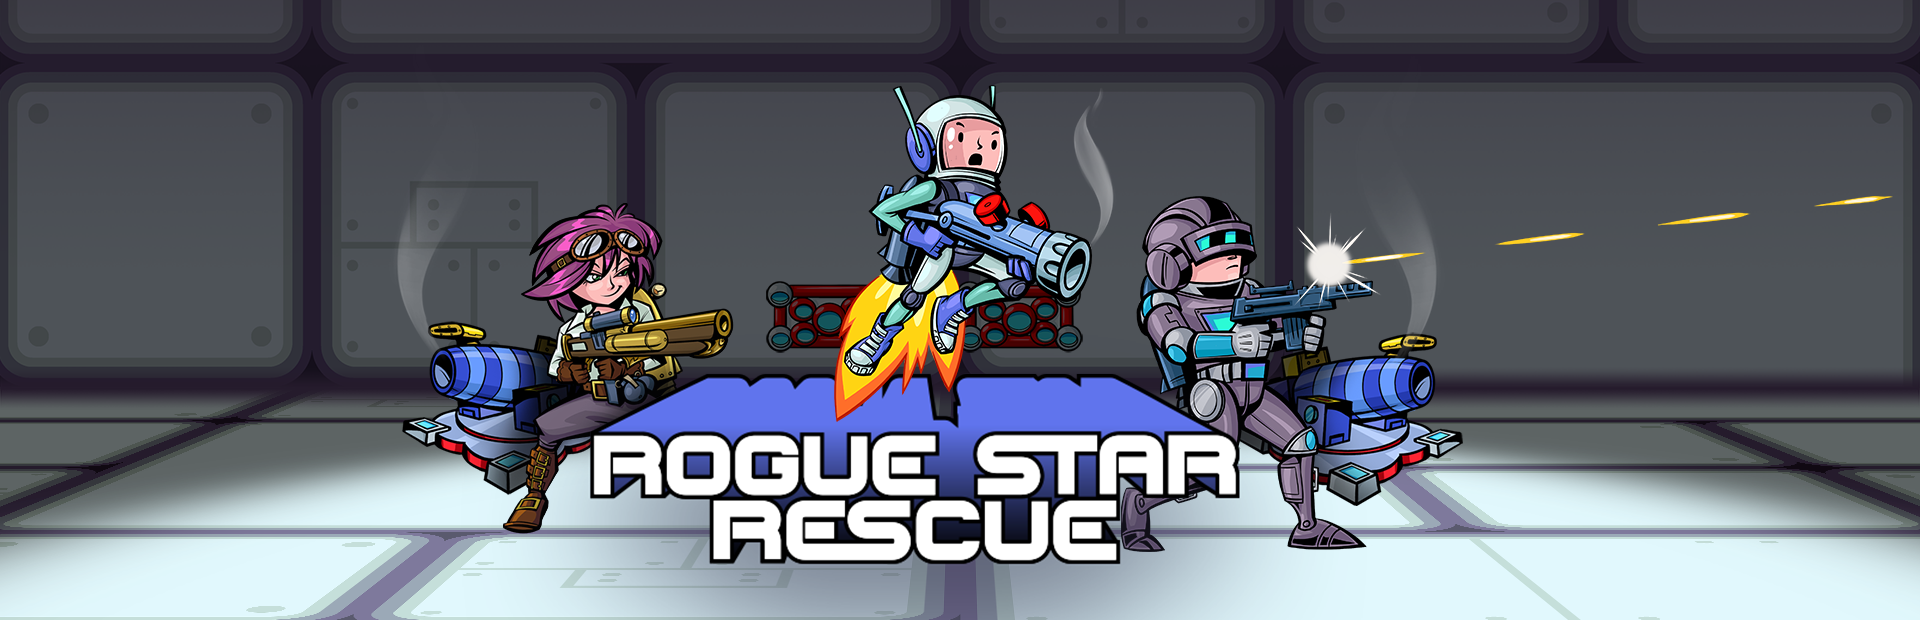 rogue tower game